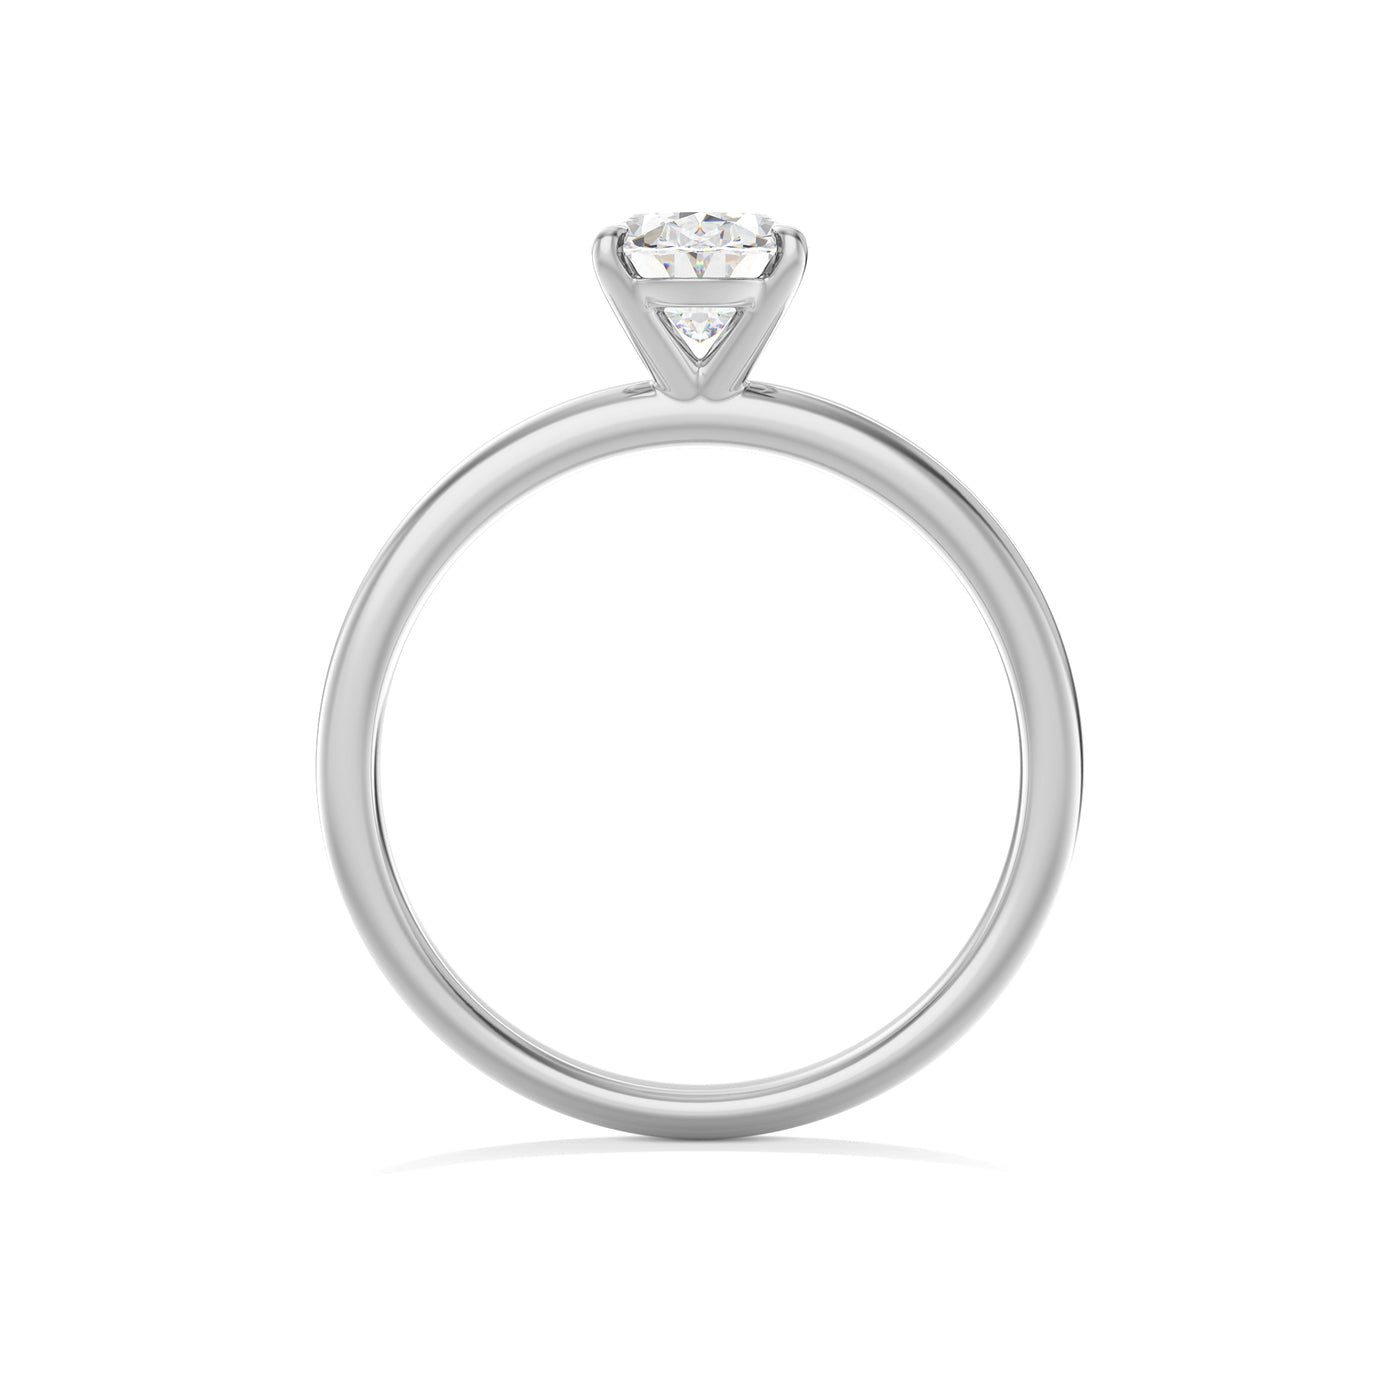 Lab Grown Diamond Solitaire Engagement Ring - Stanton